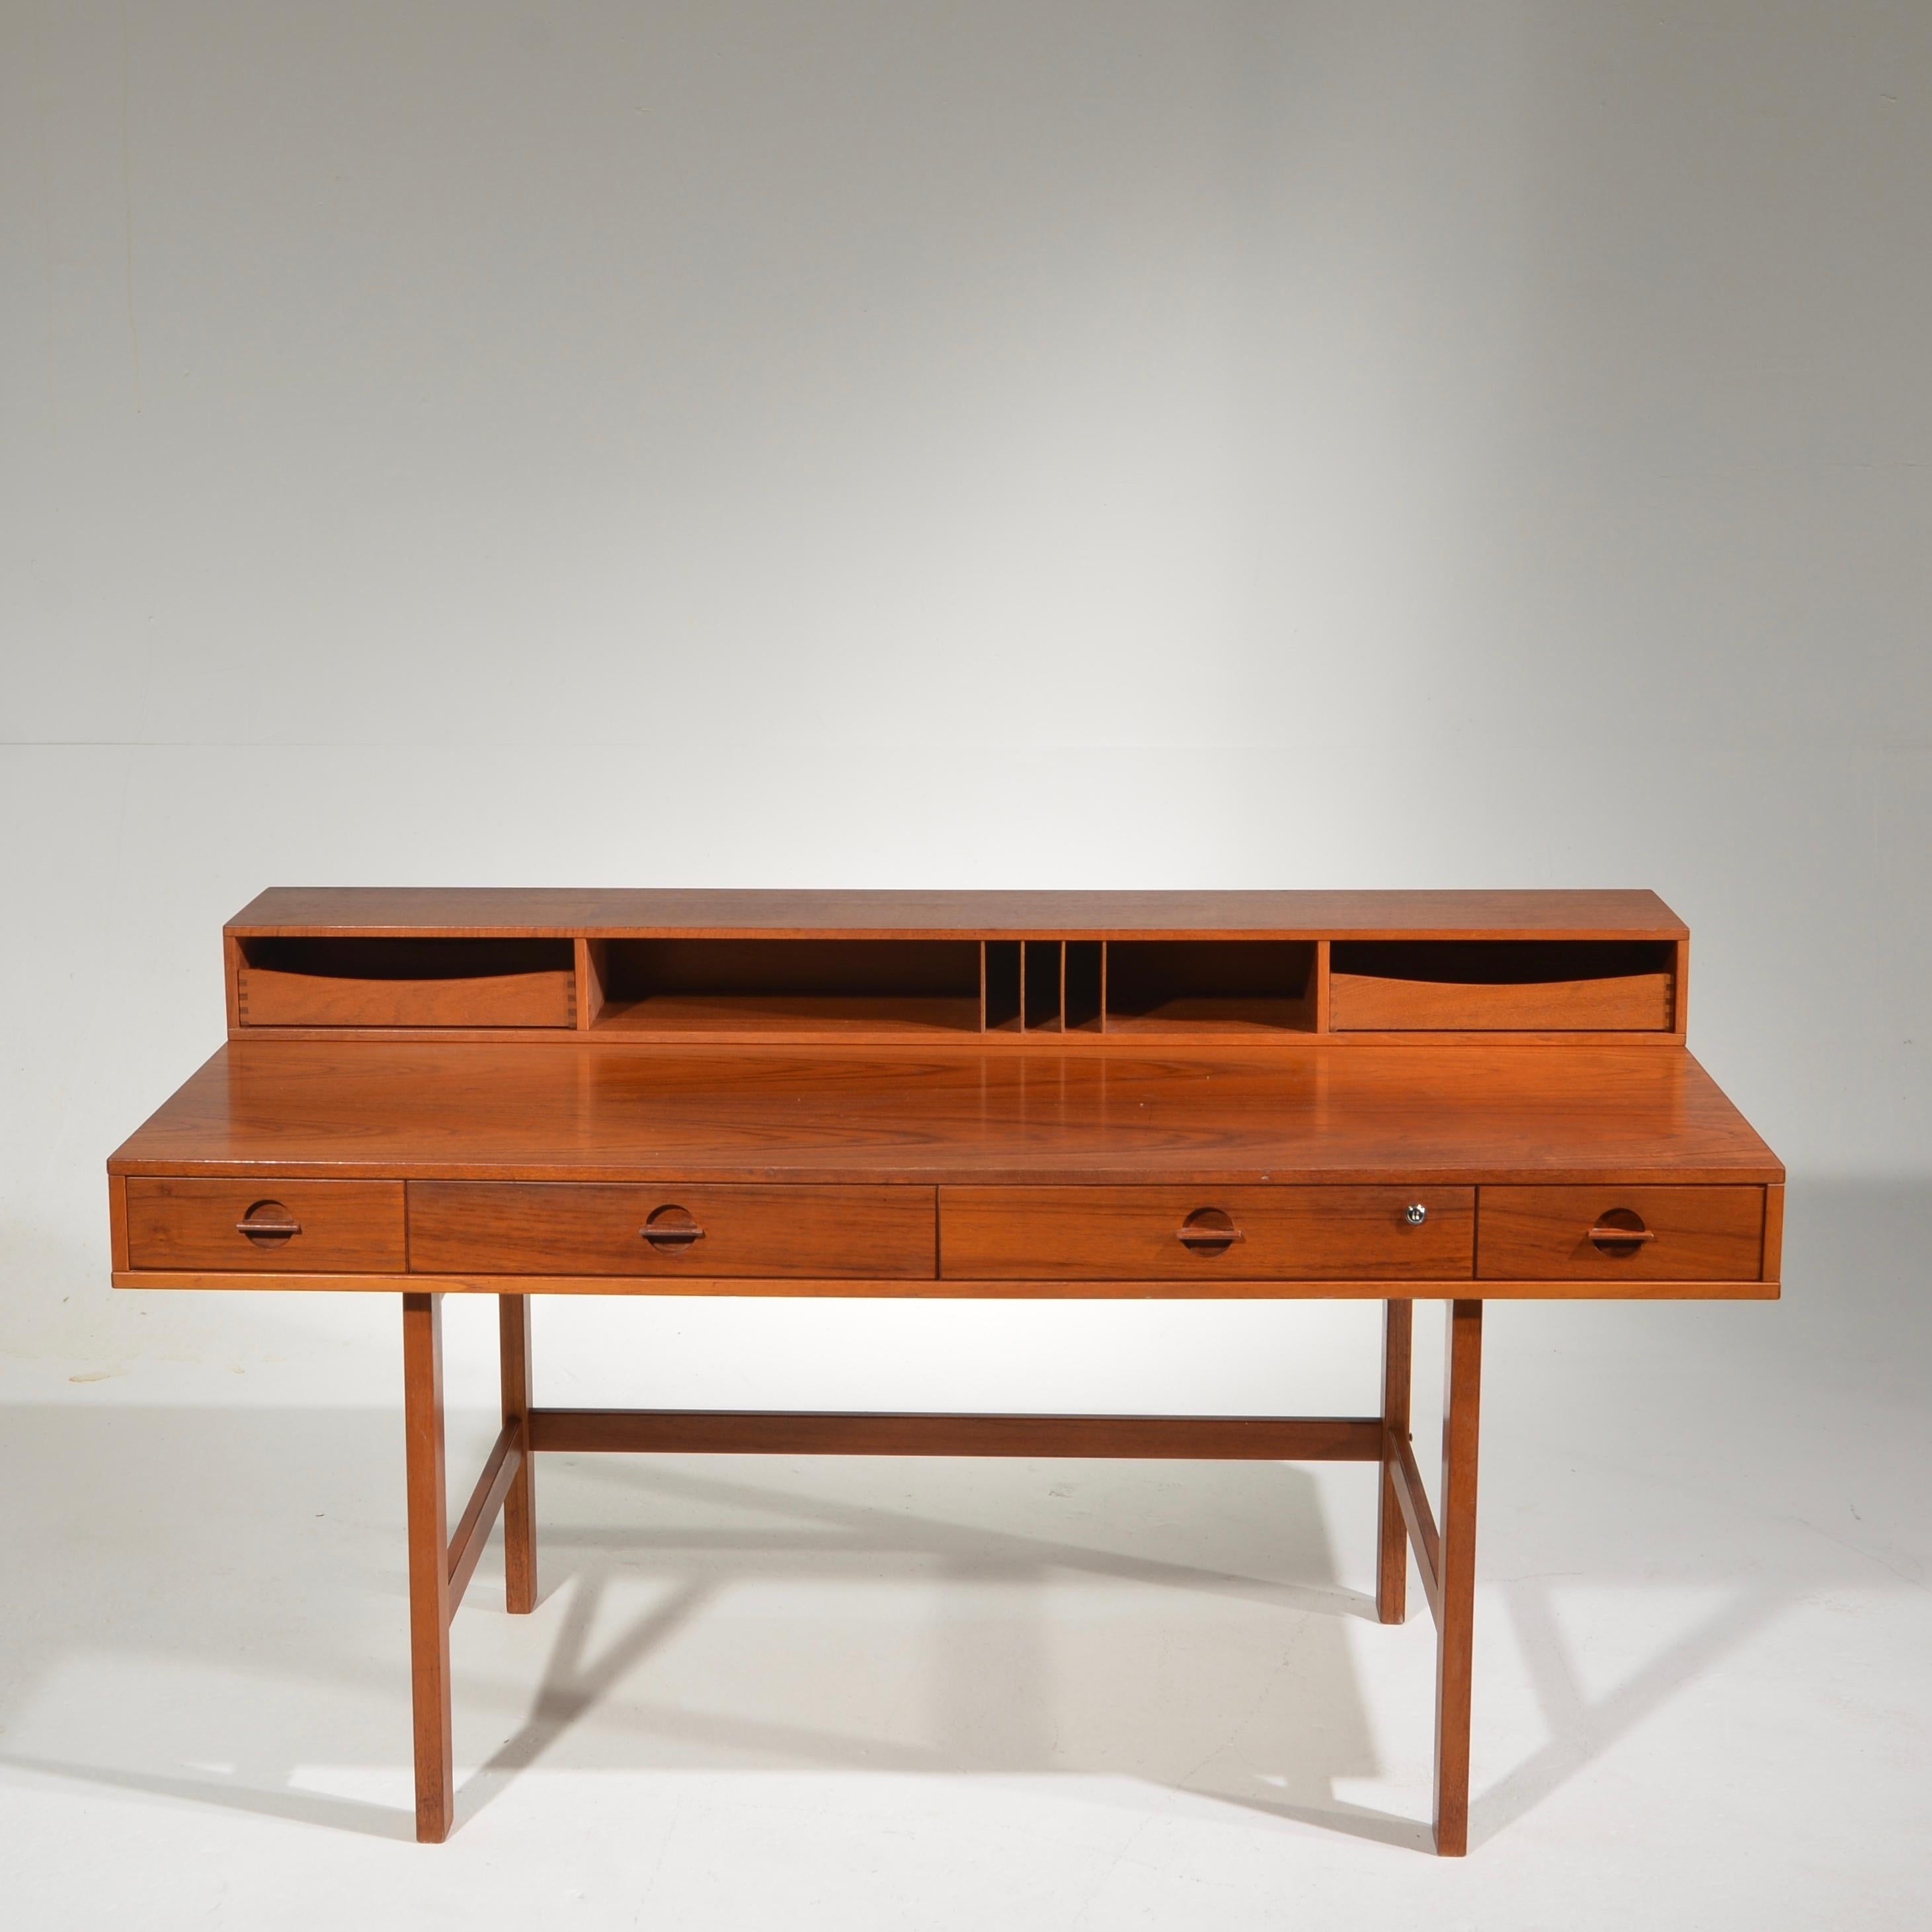 An expansive and expandable Danish modern teak executive partners desk designed by Jens Quistgaard of Dansk for Peter Løvig Nielsen.
This piece is viewable at our Downtown LA warehouse. All of our item carry a 2 year warranty, see store policies